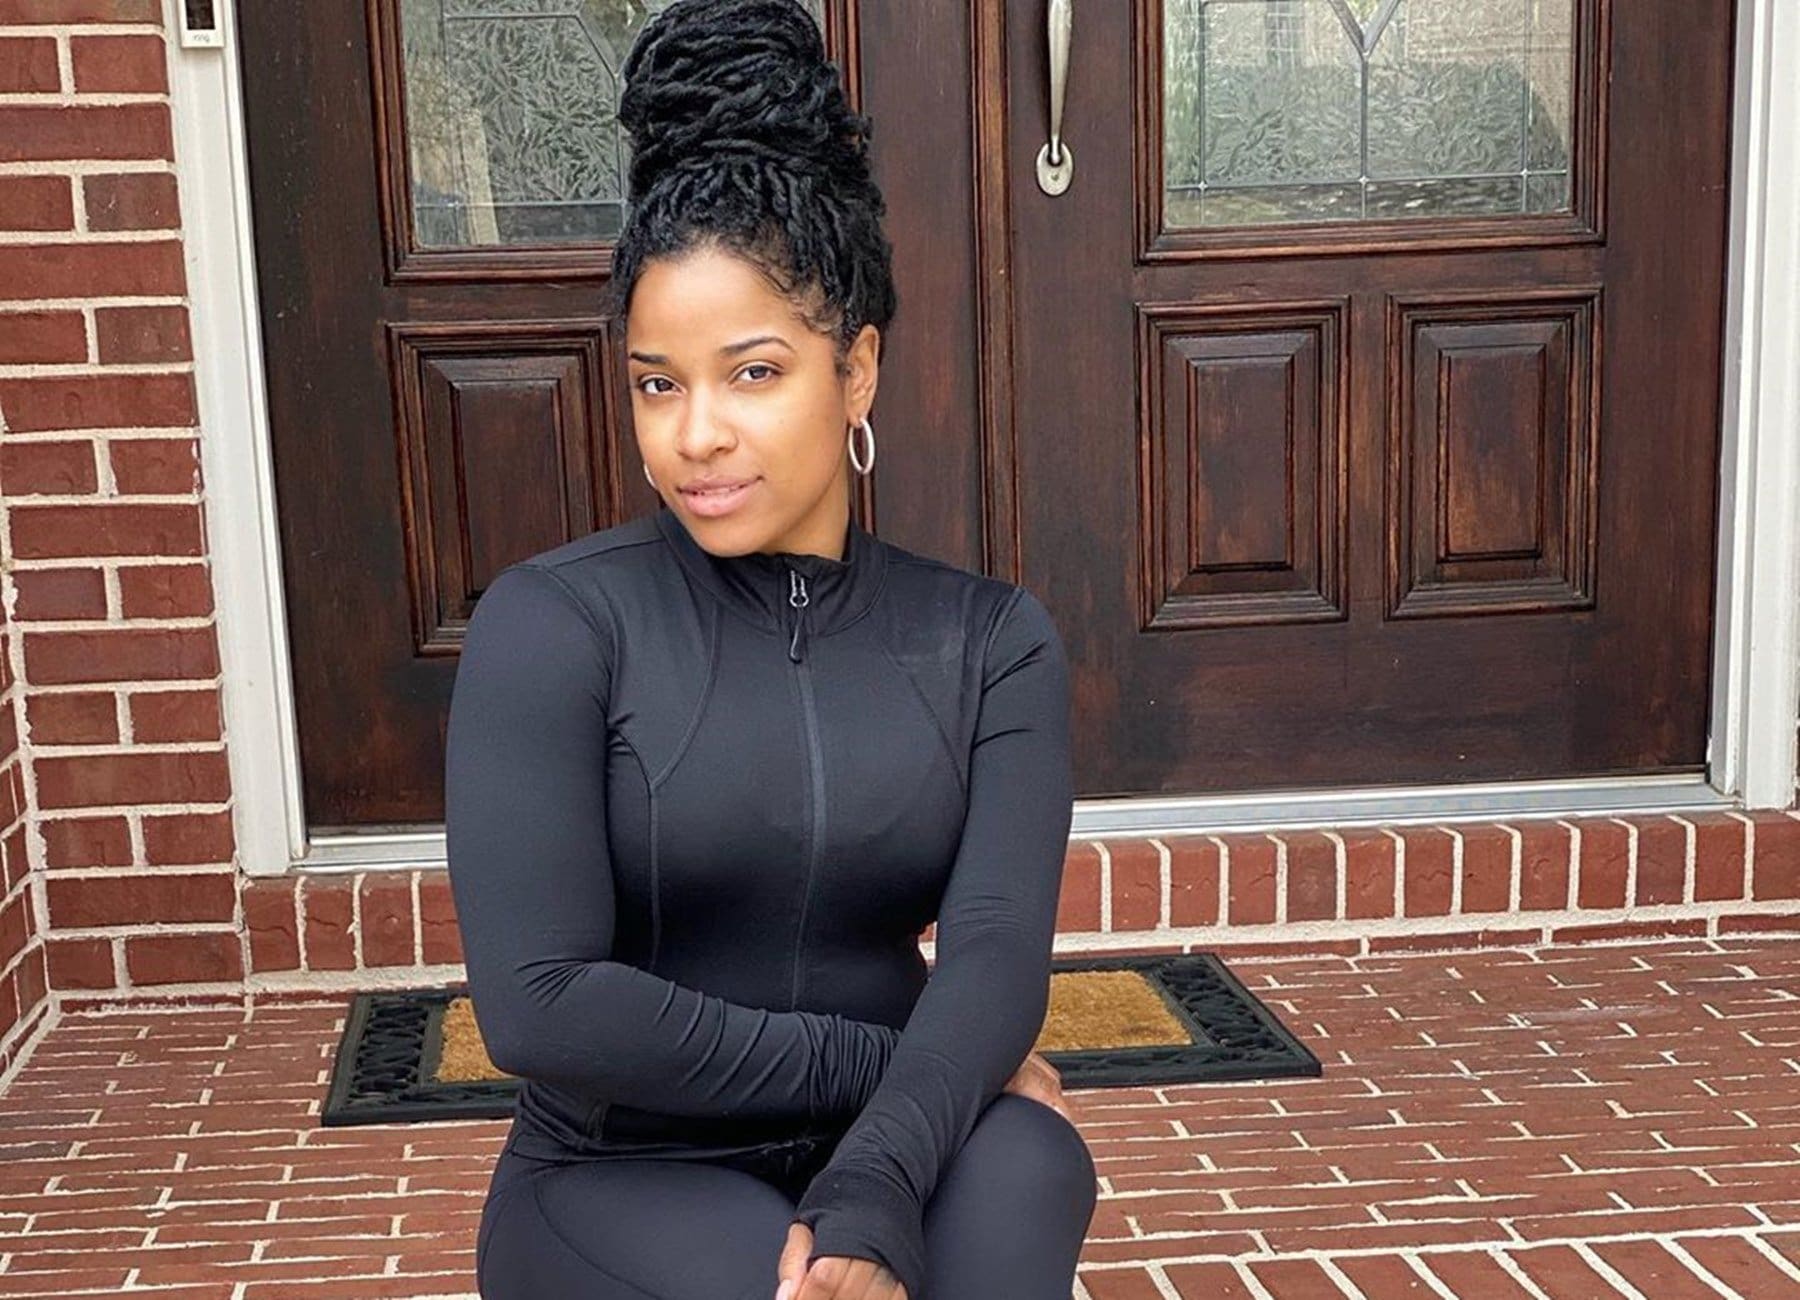 Toya Johnson Flexes For The 'Gram With Monica Denise - See Their Clip Together